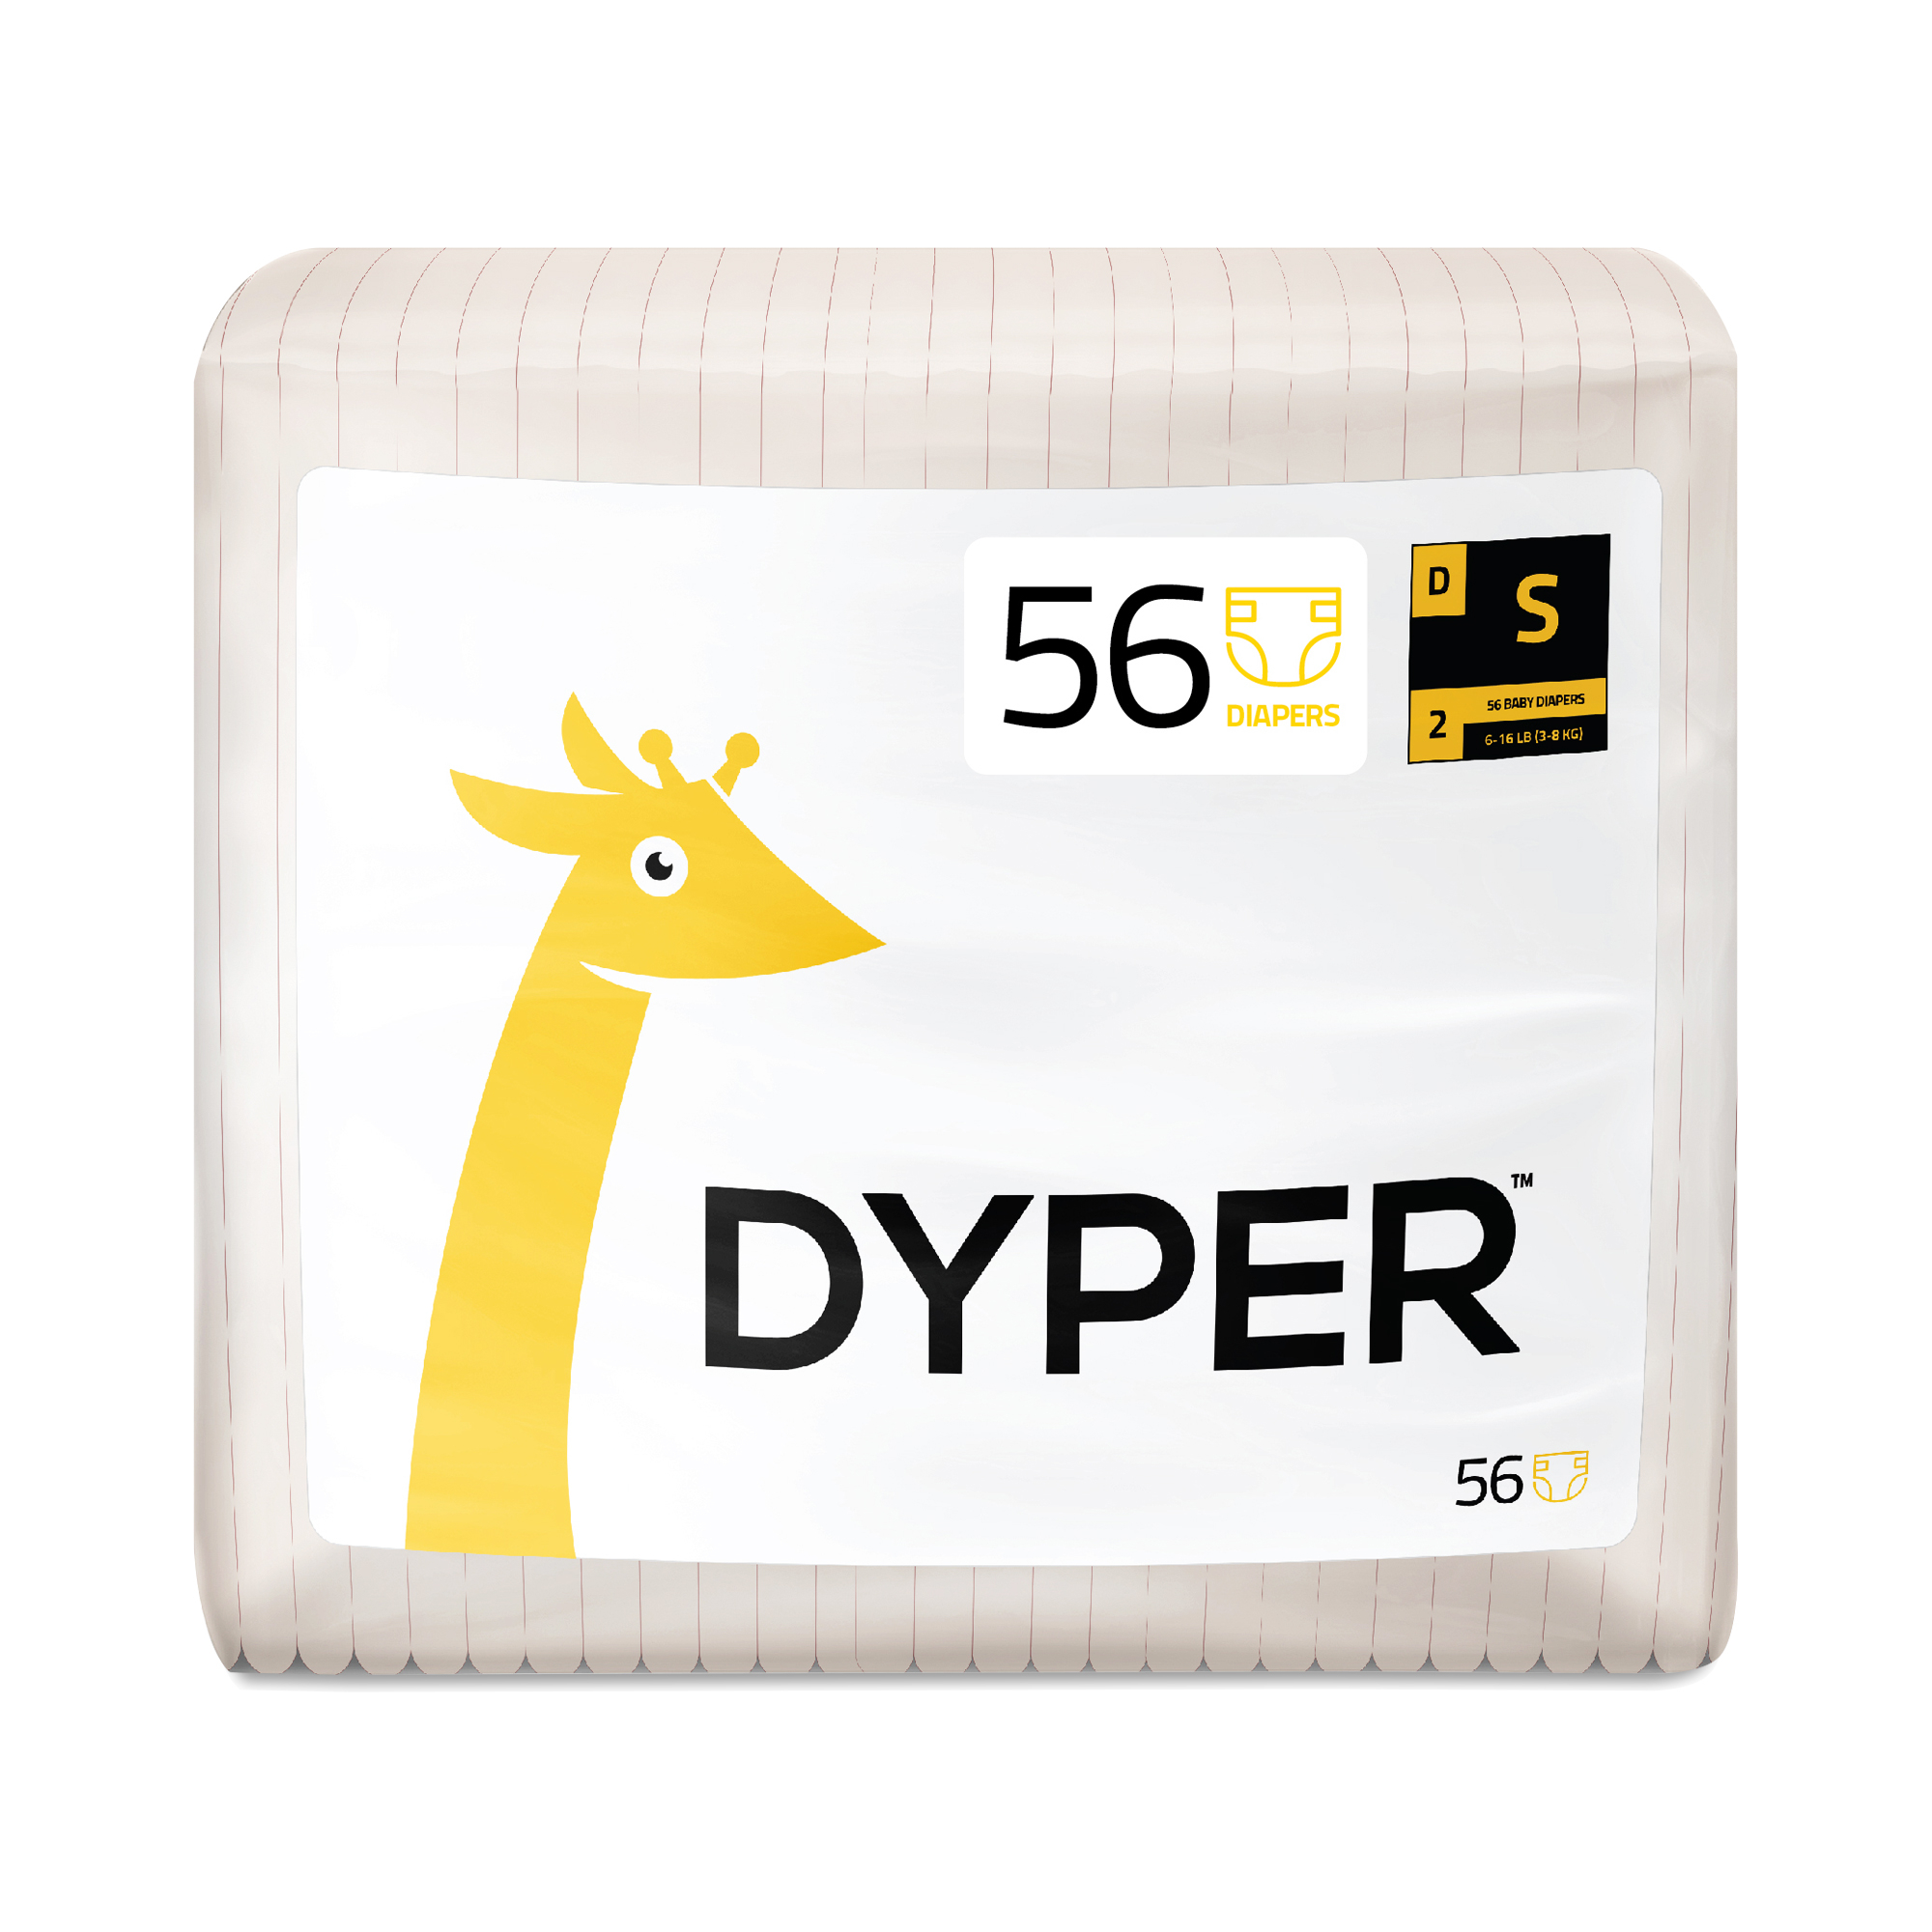 Dyper Bamboo Diapers, Size 2 56 diapers